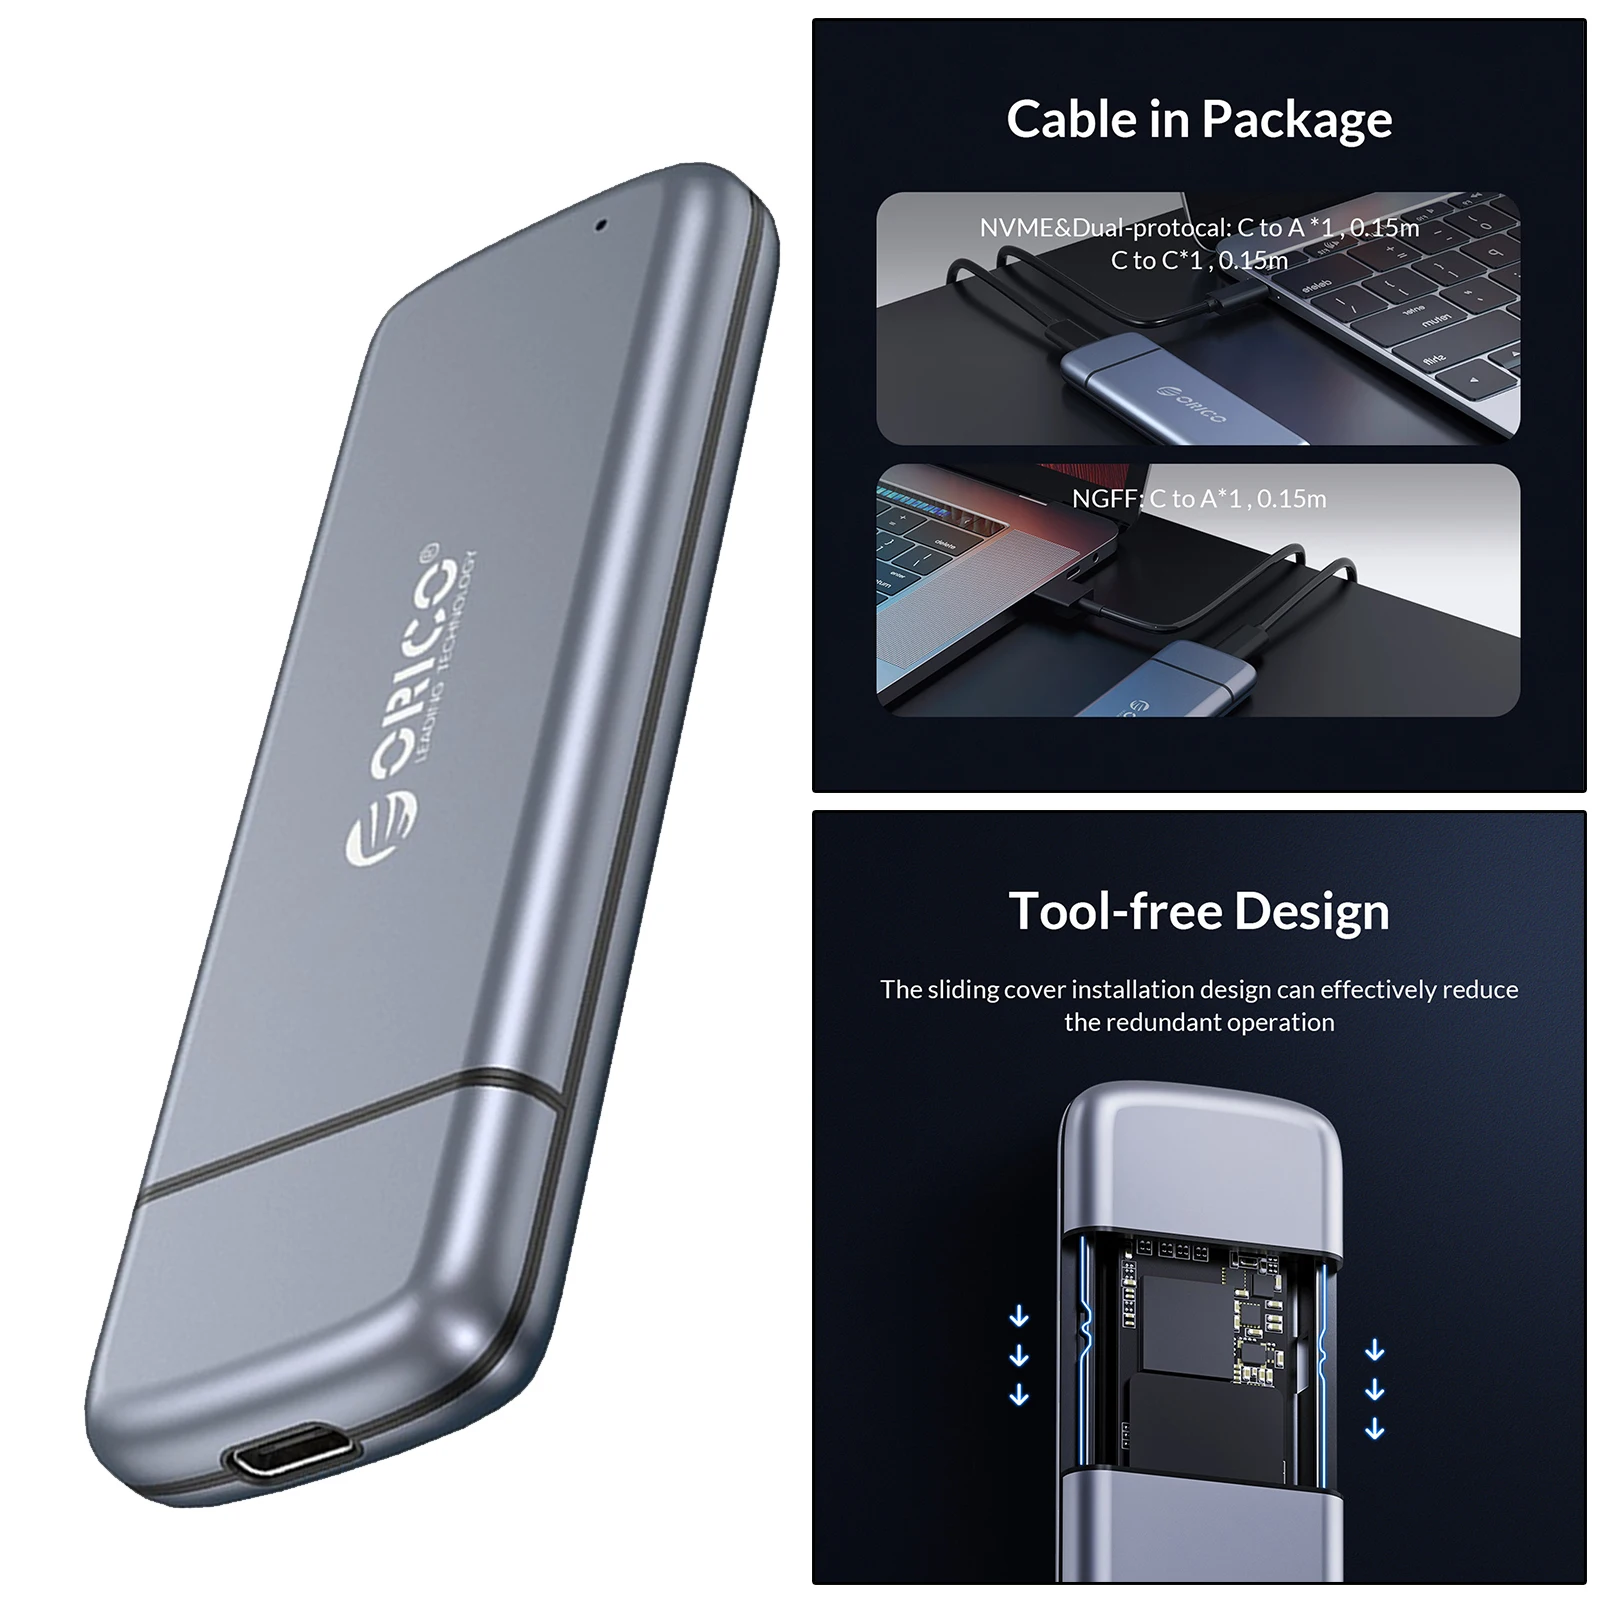 M2 SSD Case USB 3.1 Type-C to M.2 NVMe - Portable M.2 PCIe Adapter Aluminum alloy Hard Drive Case for M2 M-Key